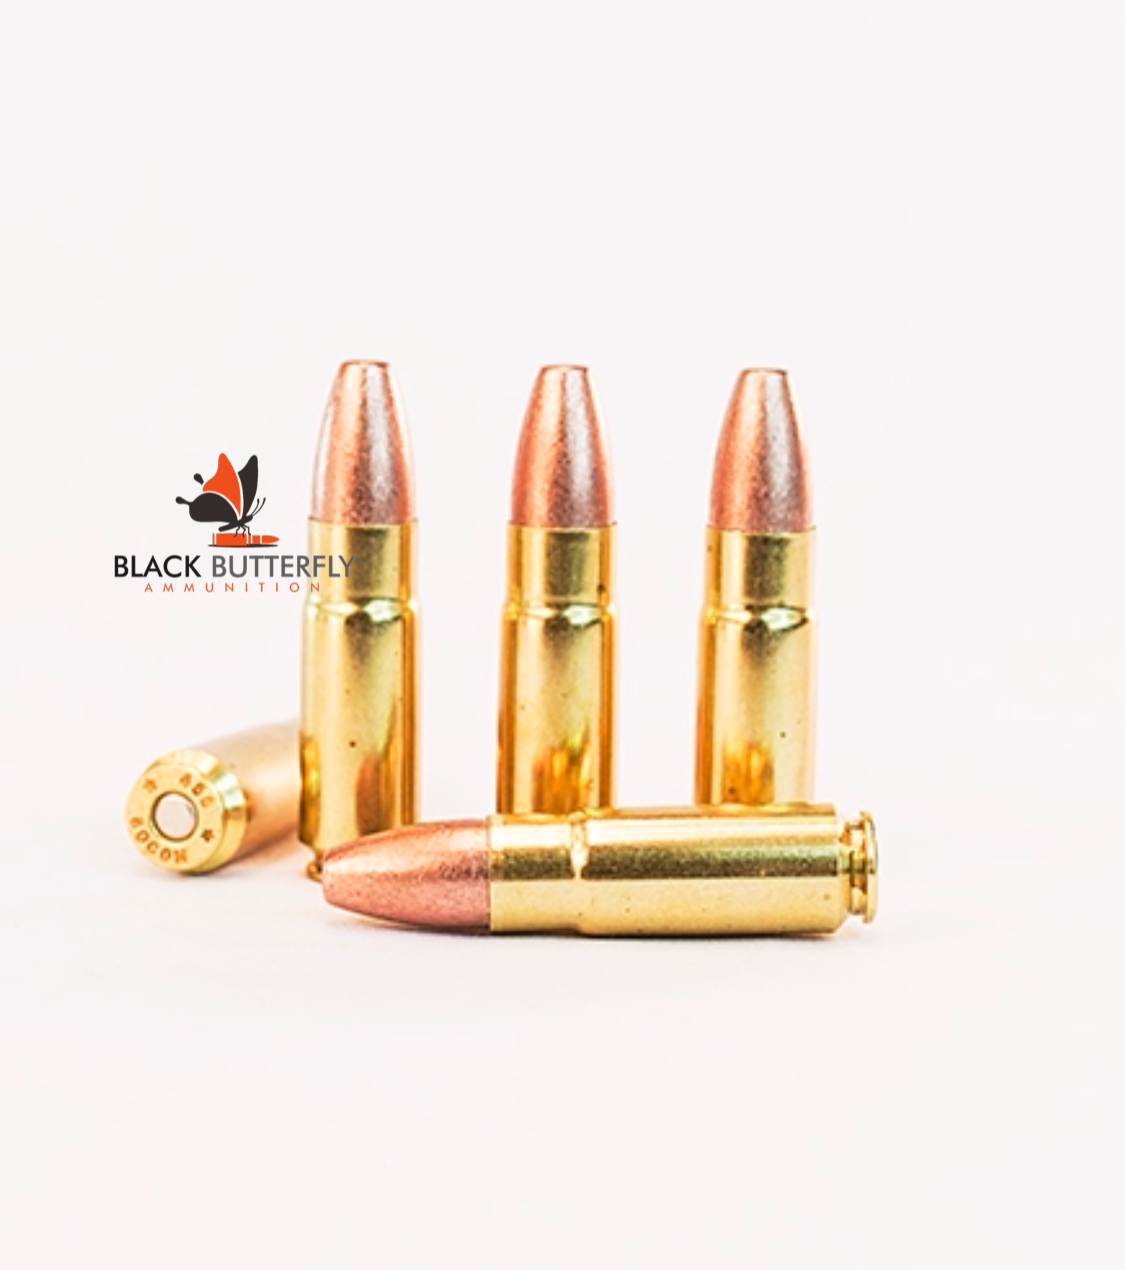 Black Butterfly Ammunition Premium, .458 SOCOM, 300 gr, 5 Rounds, CTX Migration Lead Free Frangible, No. 1 Standard Velocity (SAMPLE PACK)